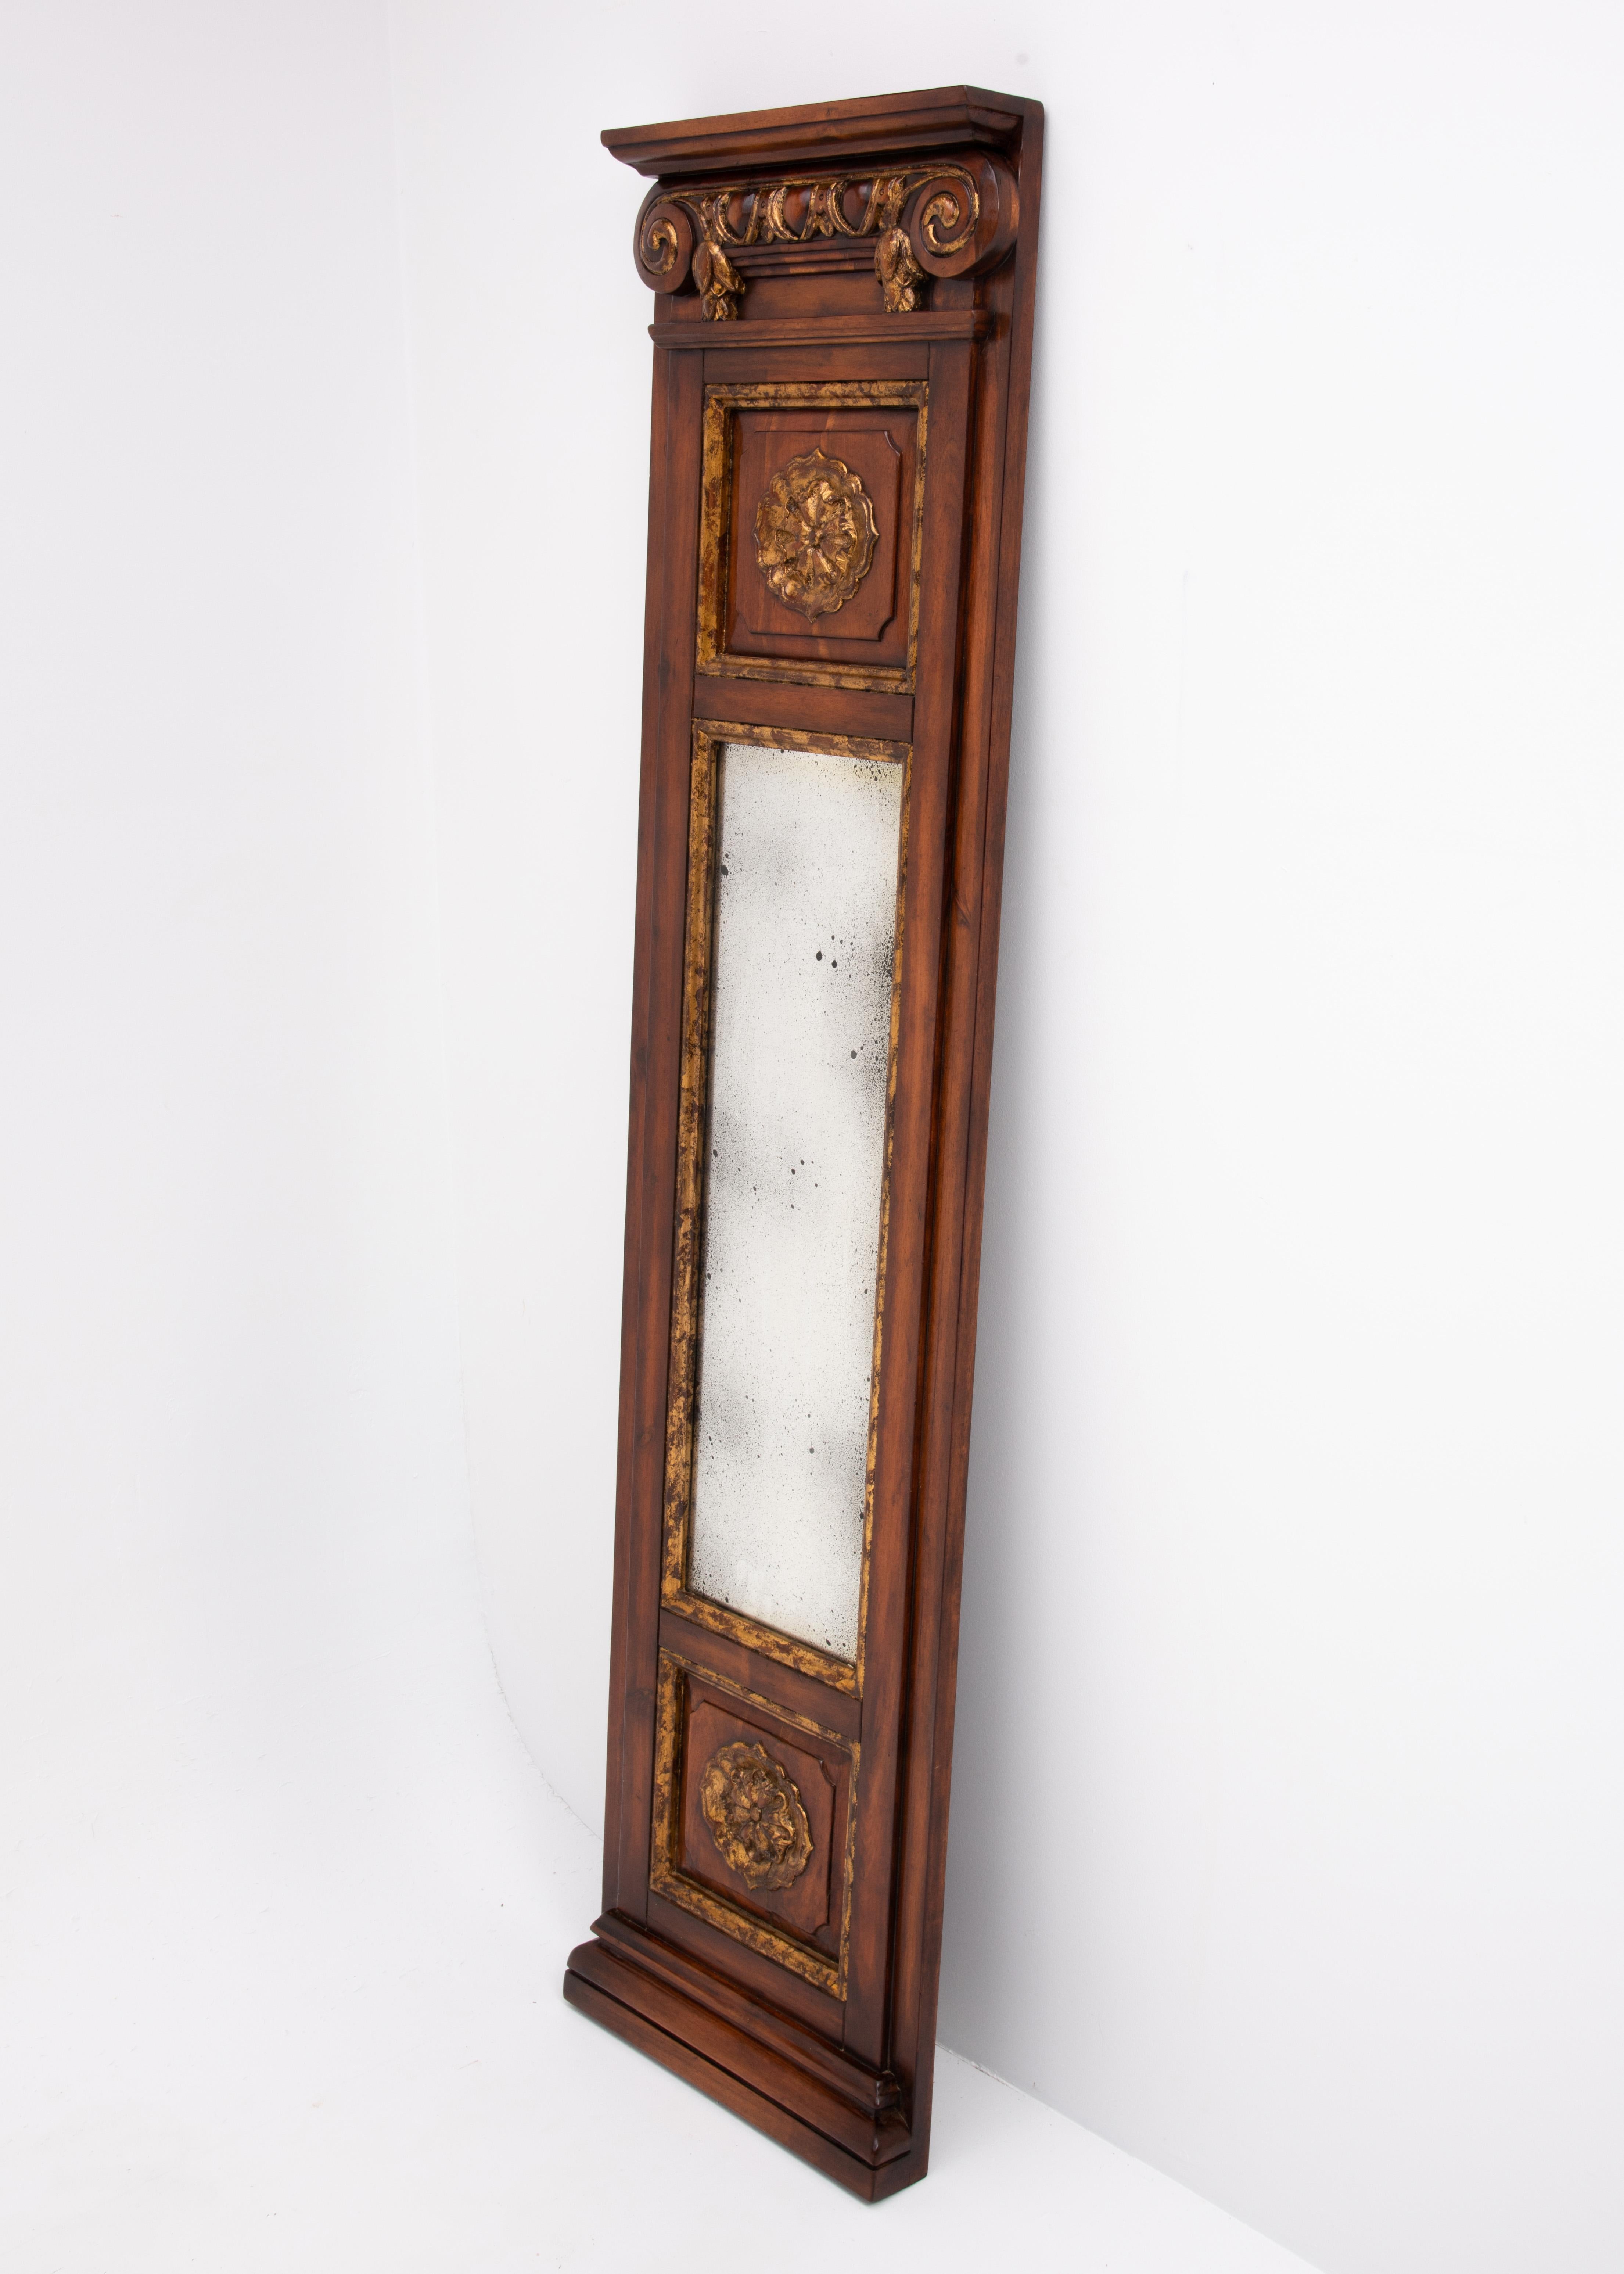 A versatile John Richard eglomisé floor, hall or wall mirror from the late 20th to early 21st century. The mirror features gilt carvings. It has factory brackets to hang but no wire.